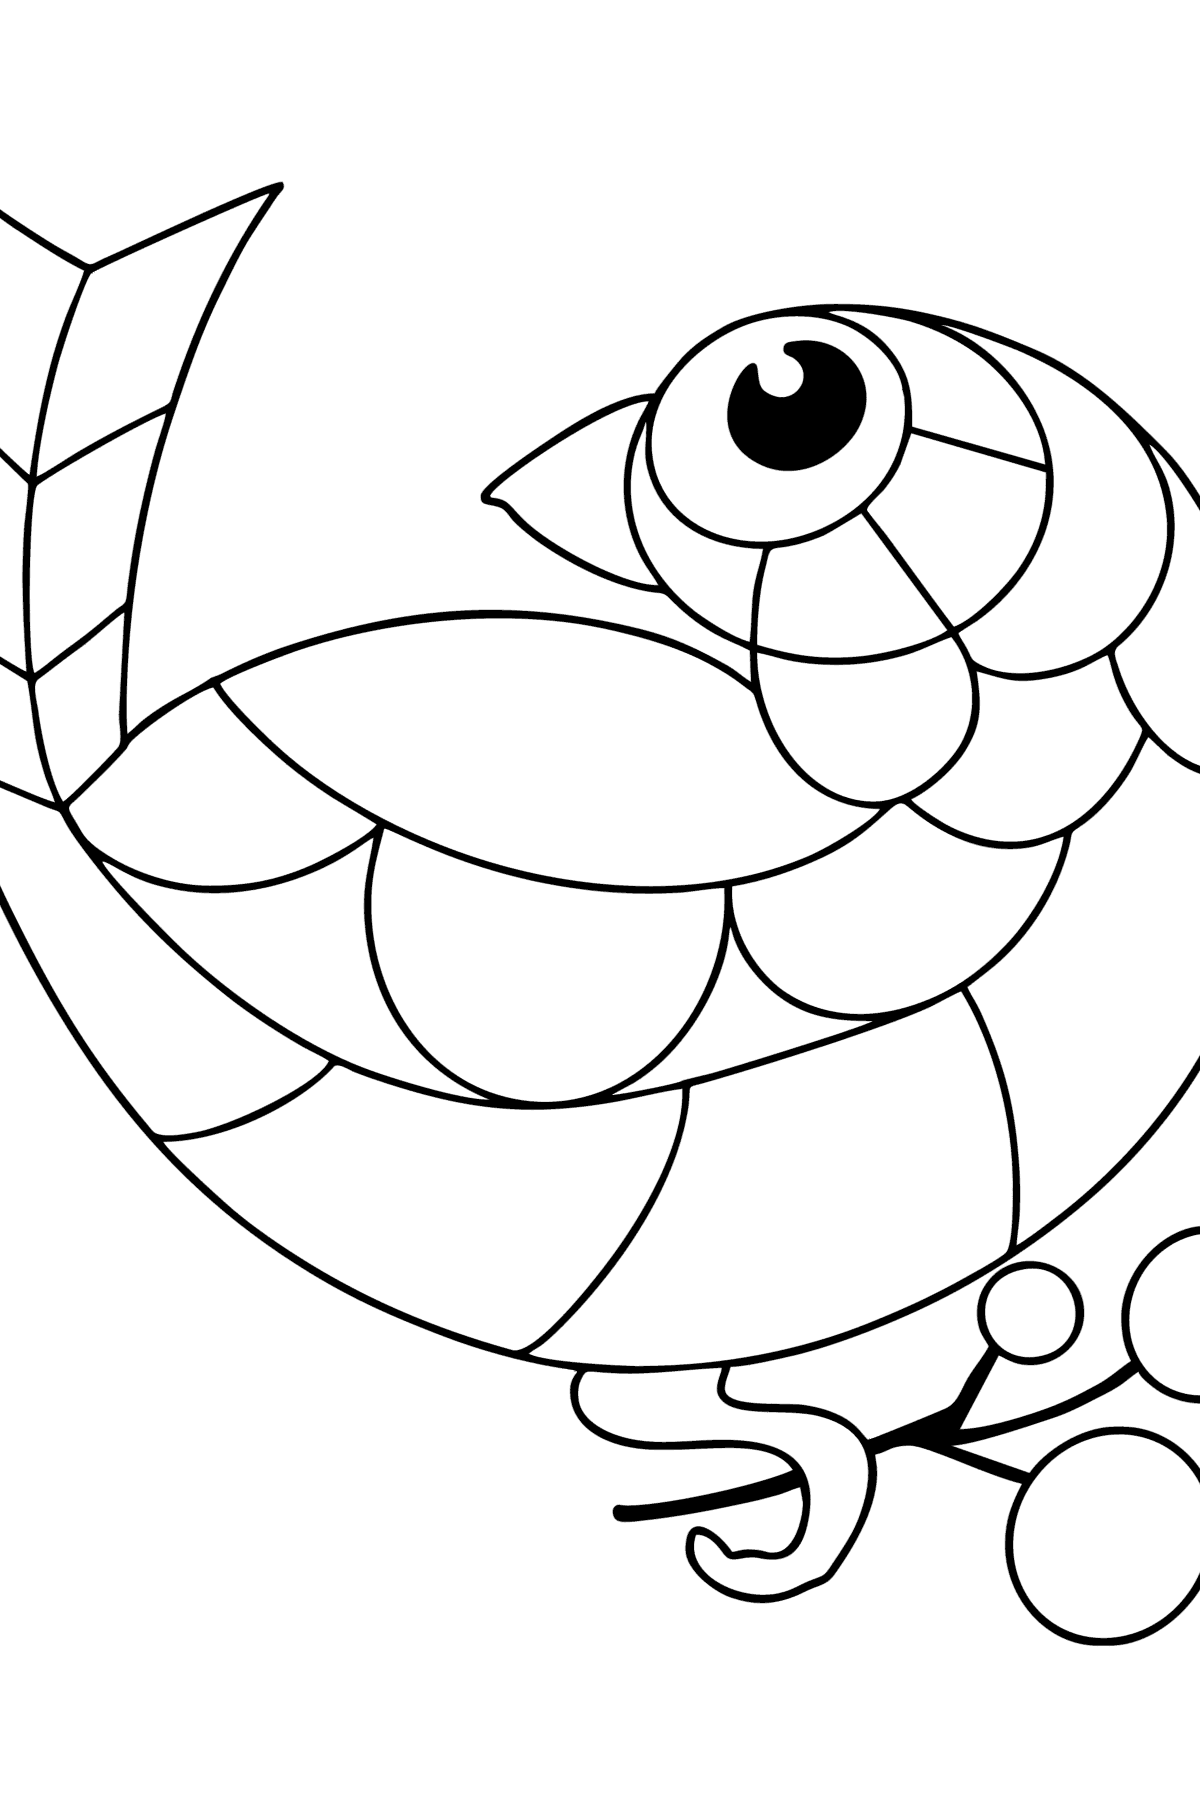 Anti stress Bird coloring page - Coloring Pages for Kids